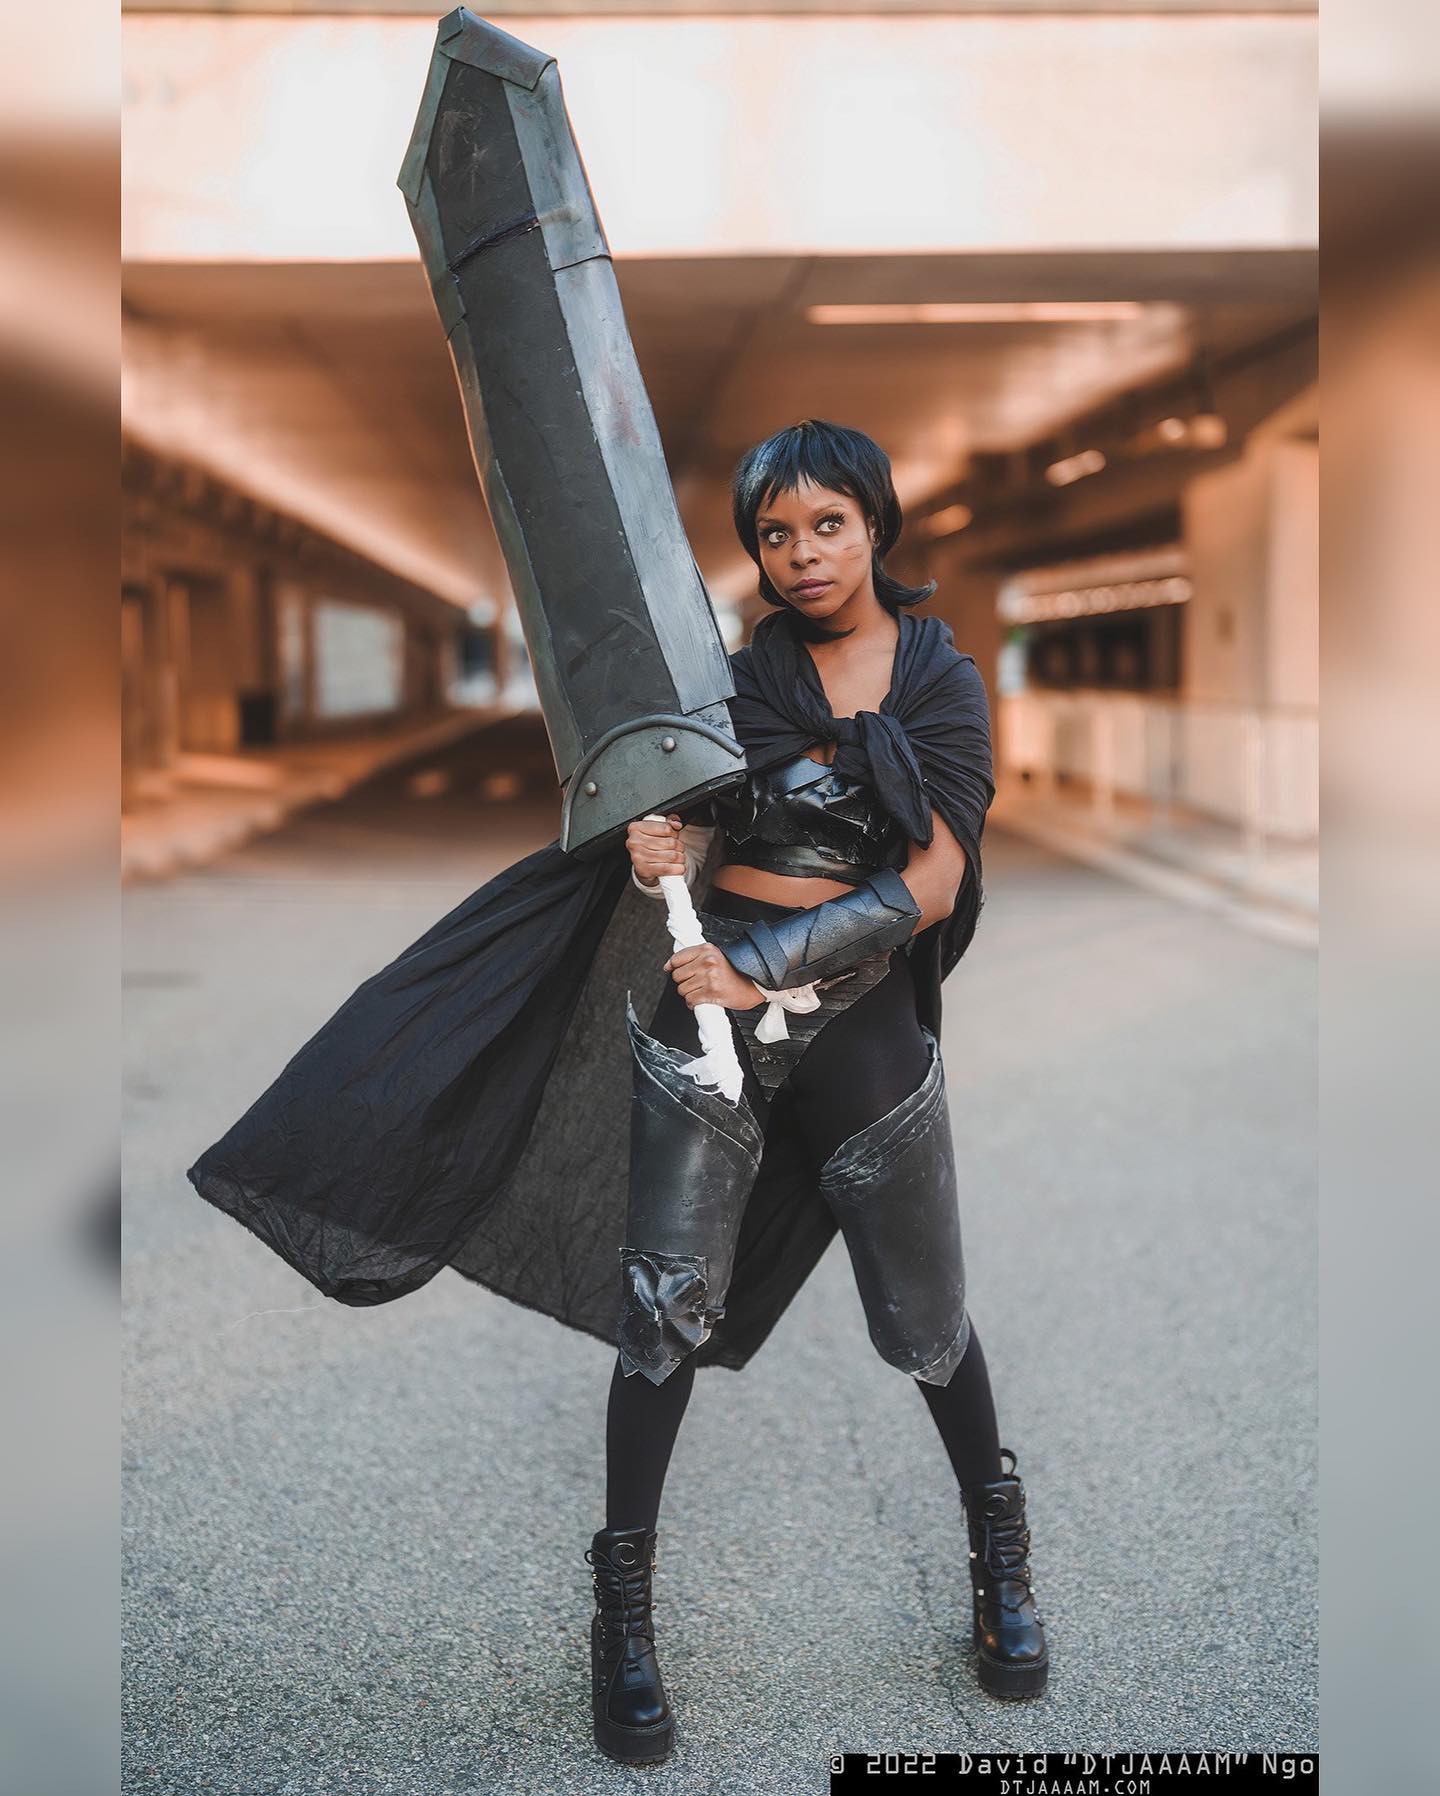 Not to worry, here’s real actual historic images of me on my way to save the world from the eclipse and The God Hand🌗🌘☀️⛅️
Source? Me⚔️
•
•
•
•
•
•
•
#guts #berserk #eclipse #eclipse2024 #gutsca #casca #cosplay #cosplayer #cosplaying #chibith0t #beserkcosplay #berserkeclipse #anime #manga #animecosplay #foamsmith #cosplaybuild #gutsberserk #gutscosplay